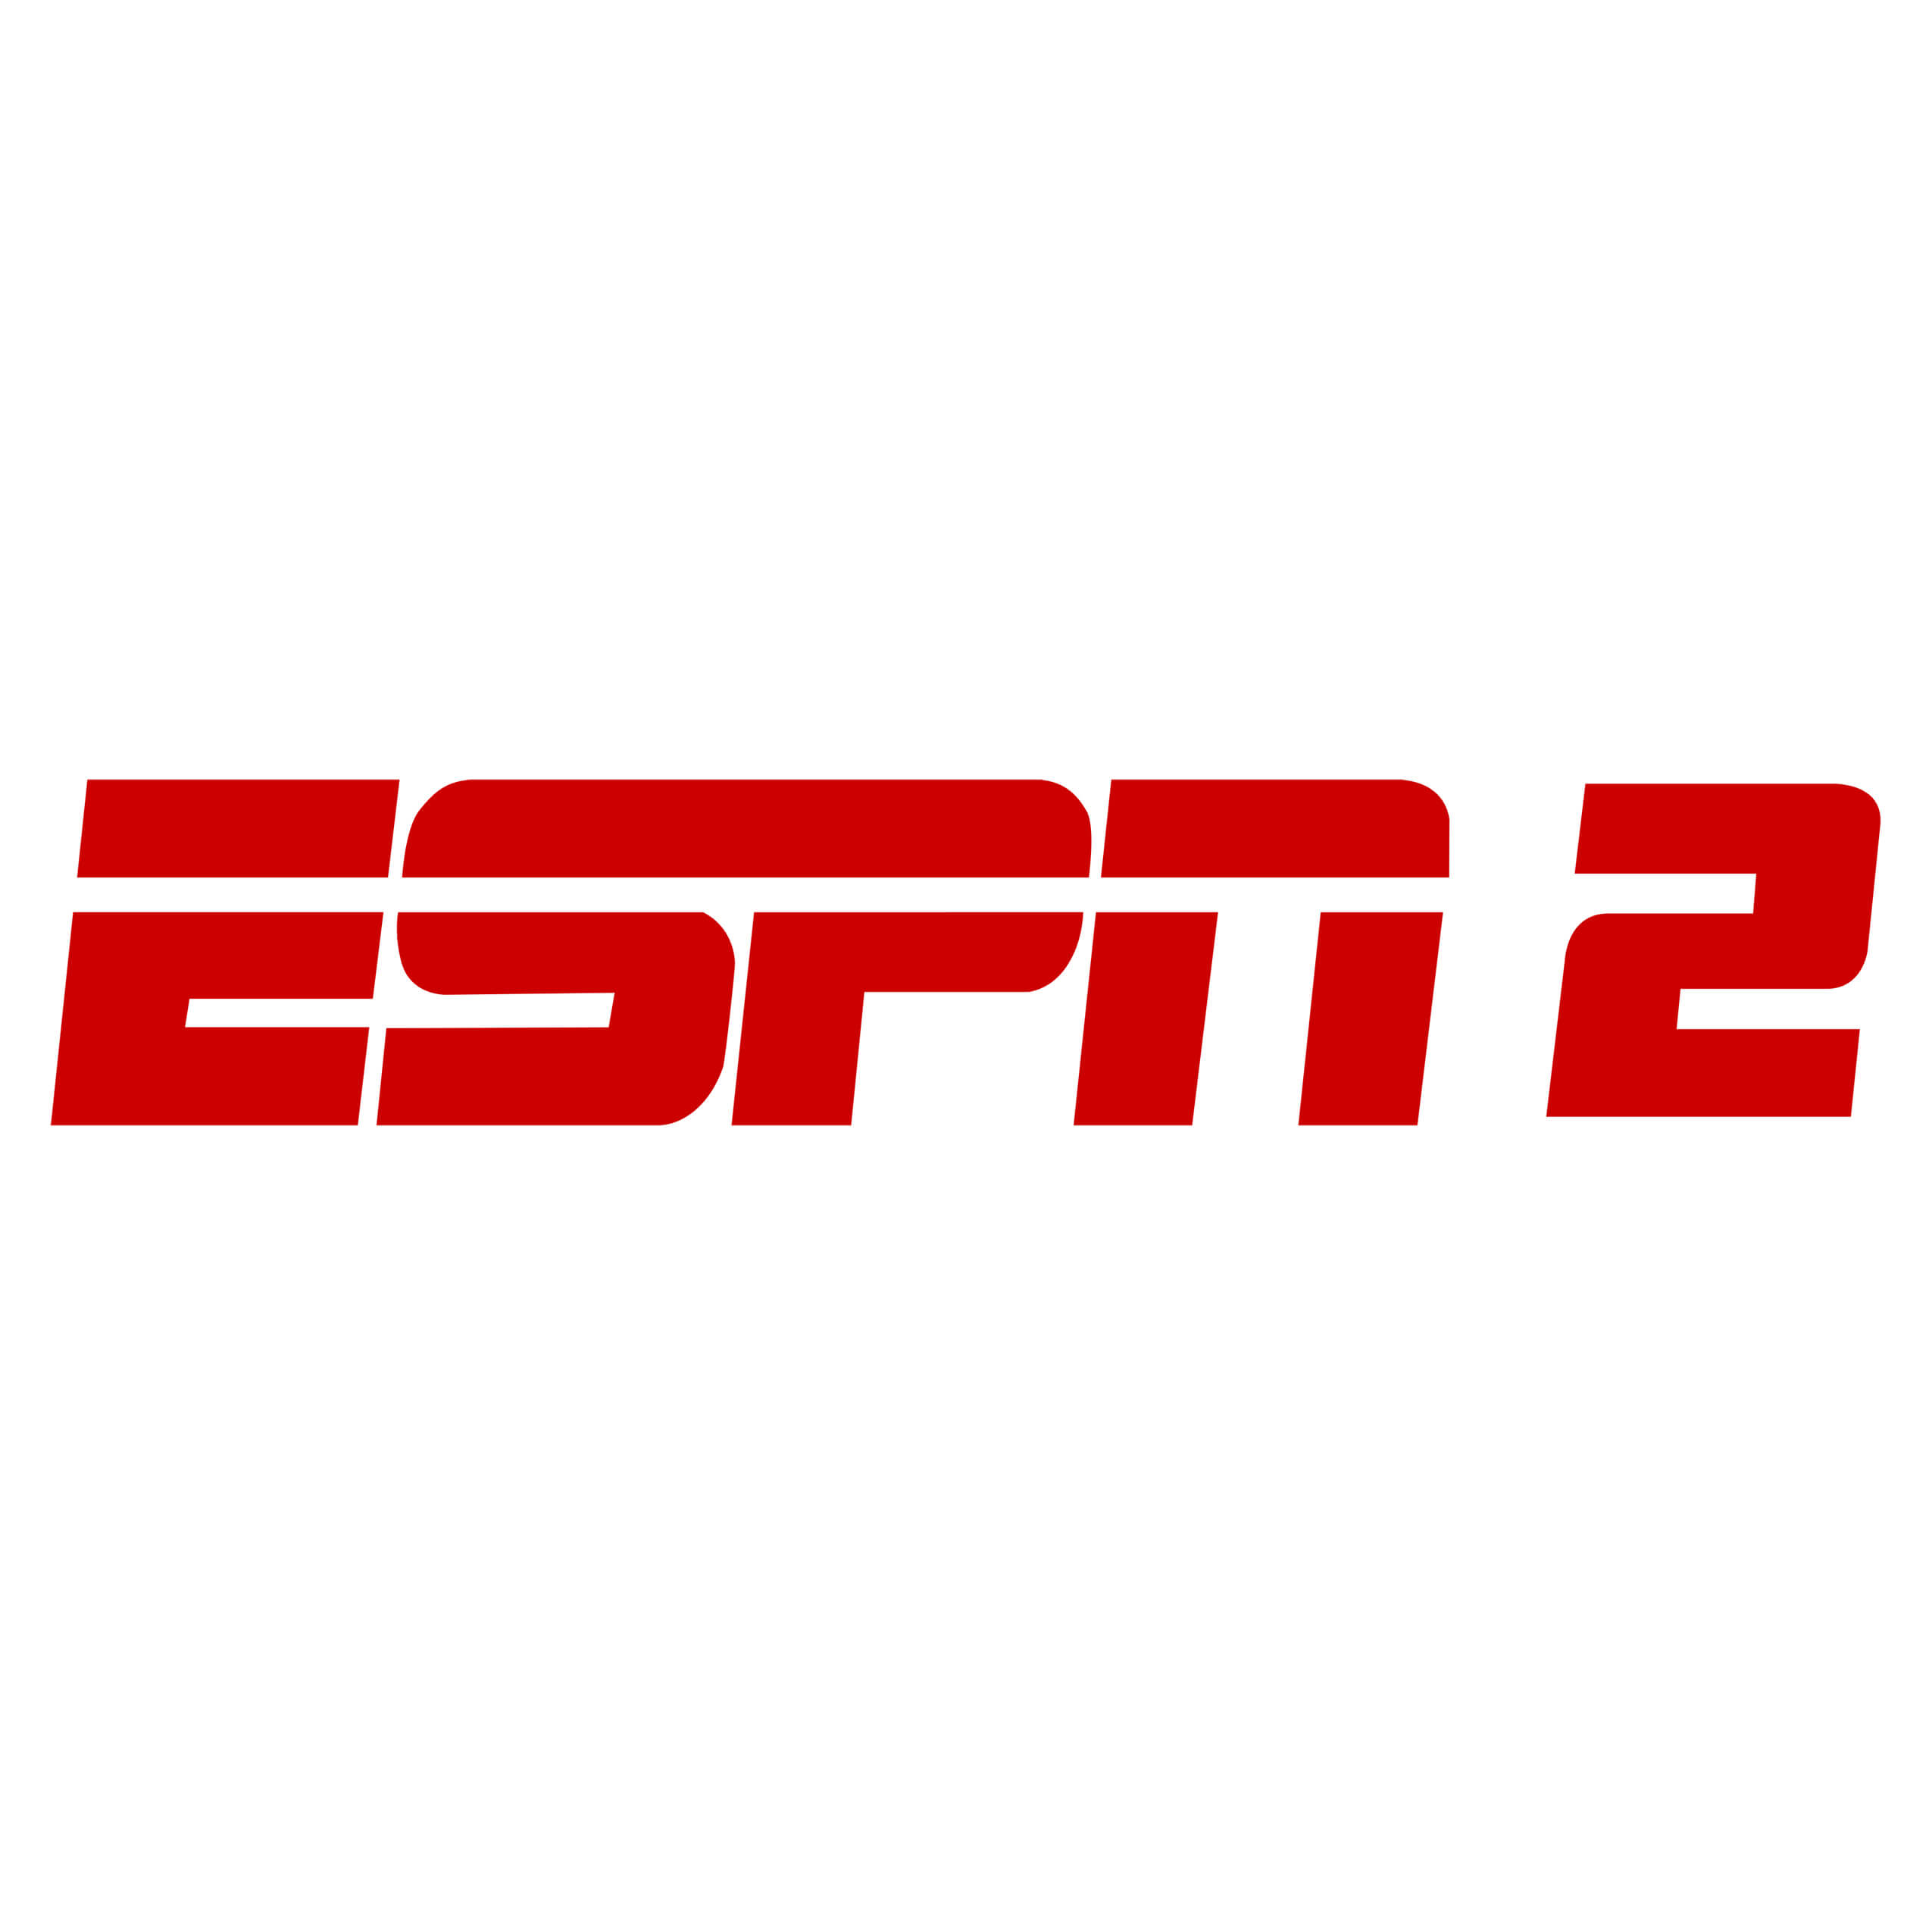 watch espn on my computer for free